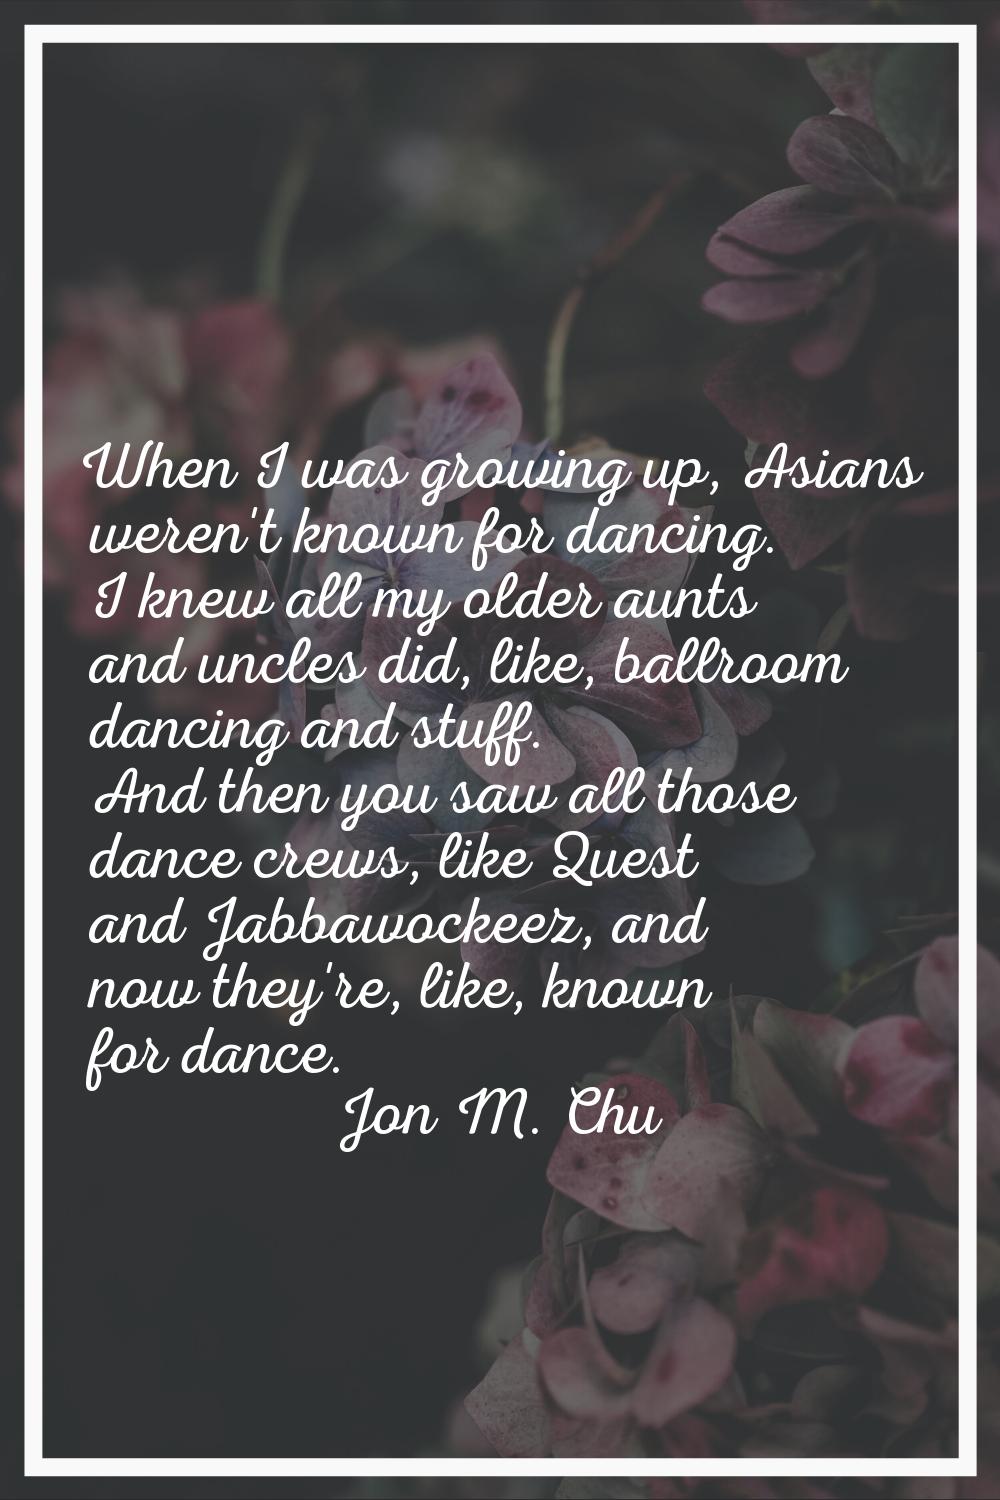 When I was growing up, Asians weren't known for dancing. I knew all my older aunts and uncles did, 